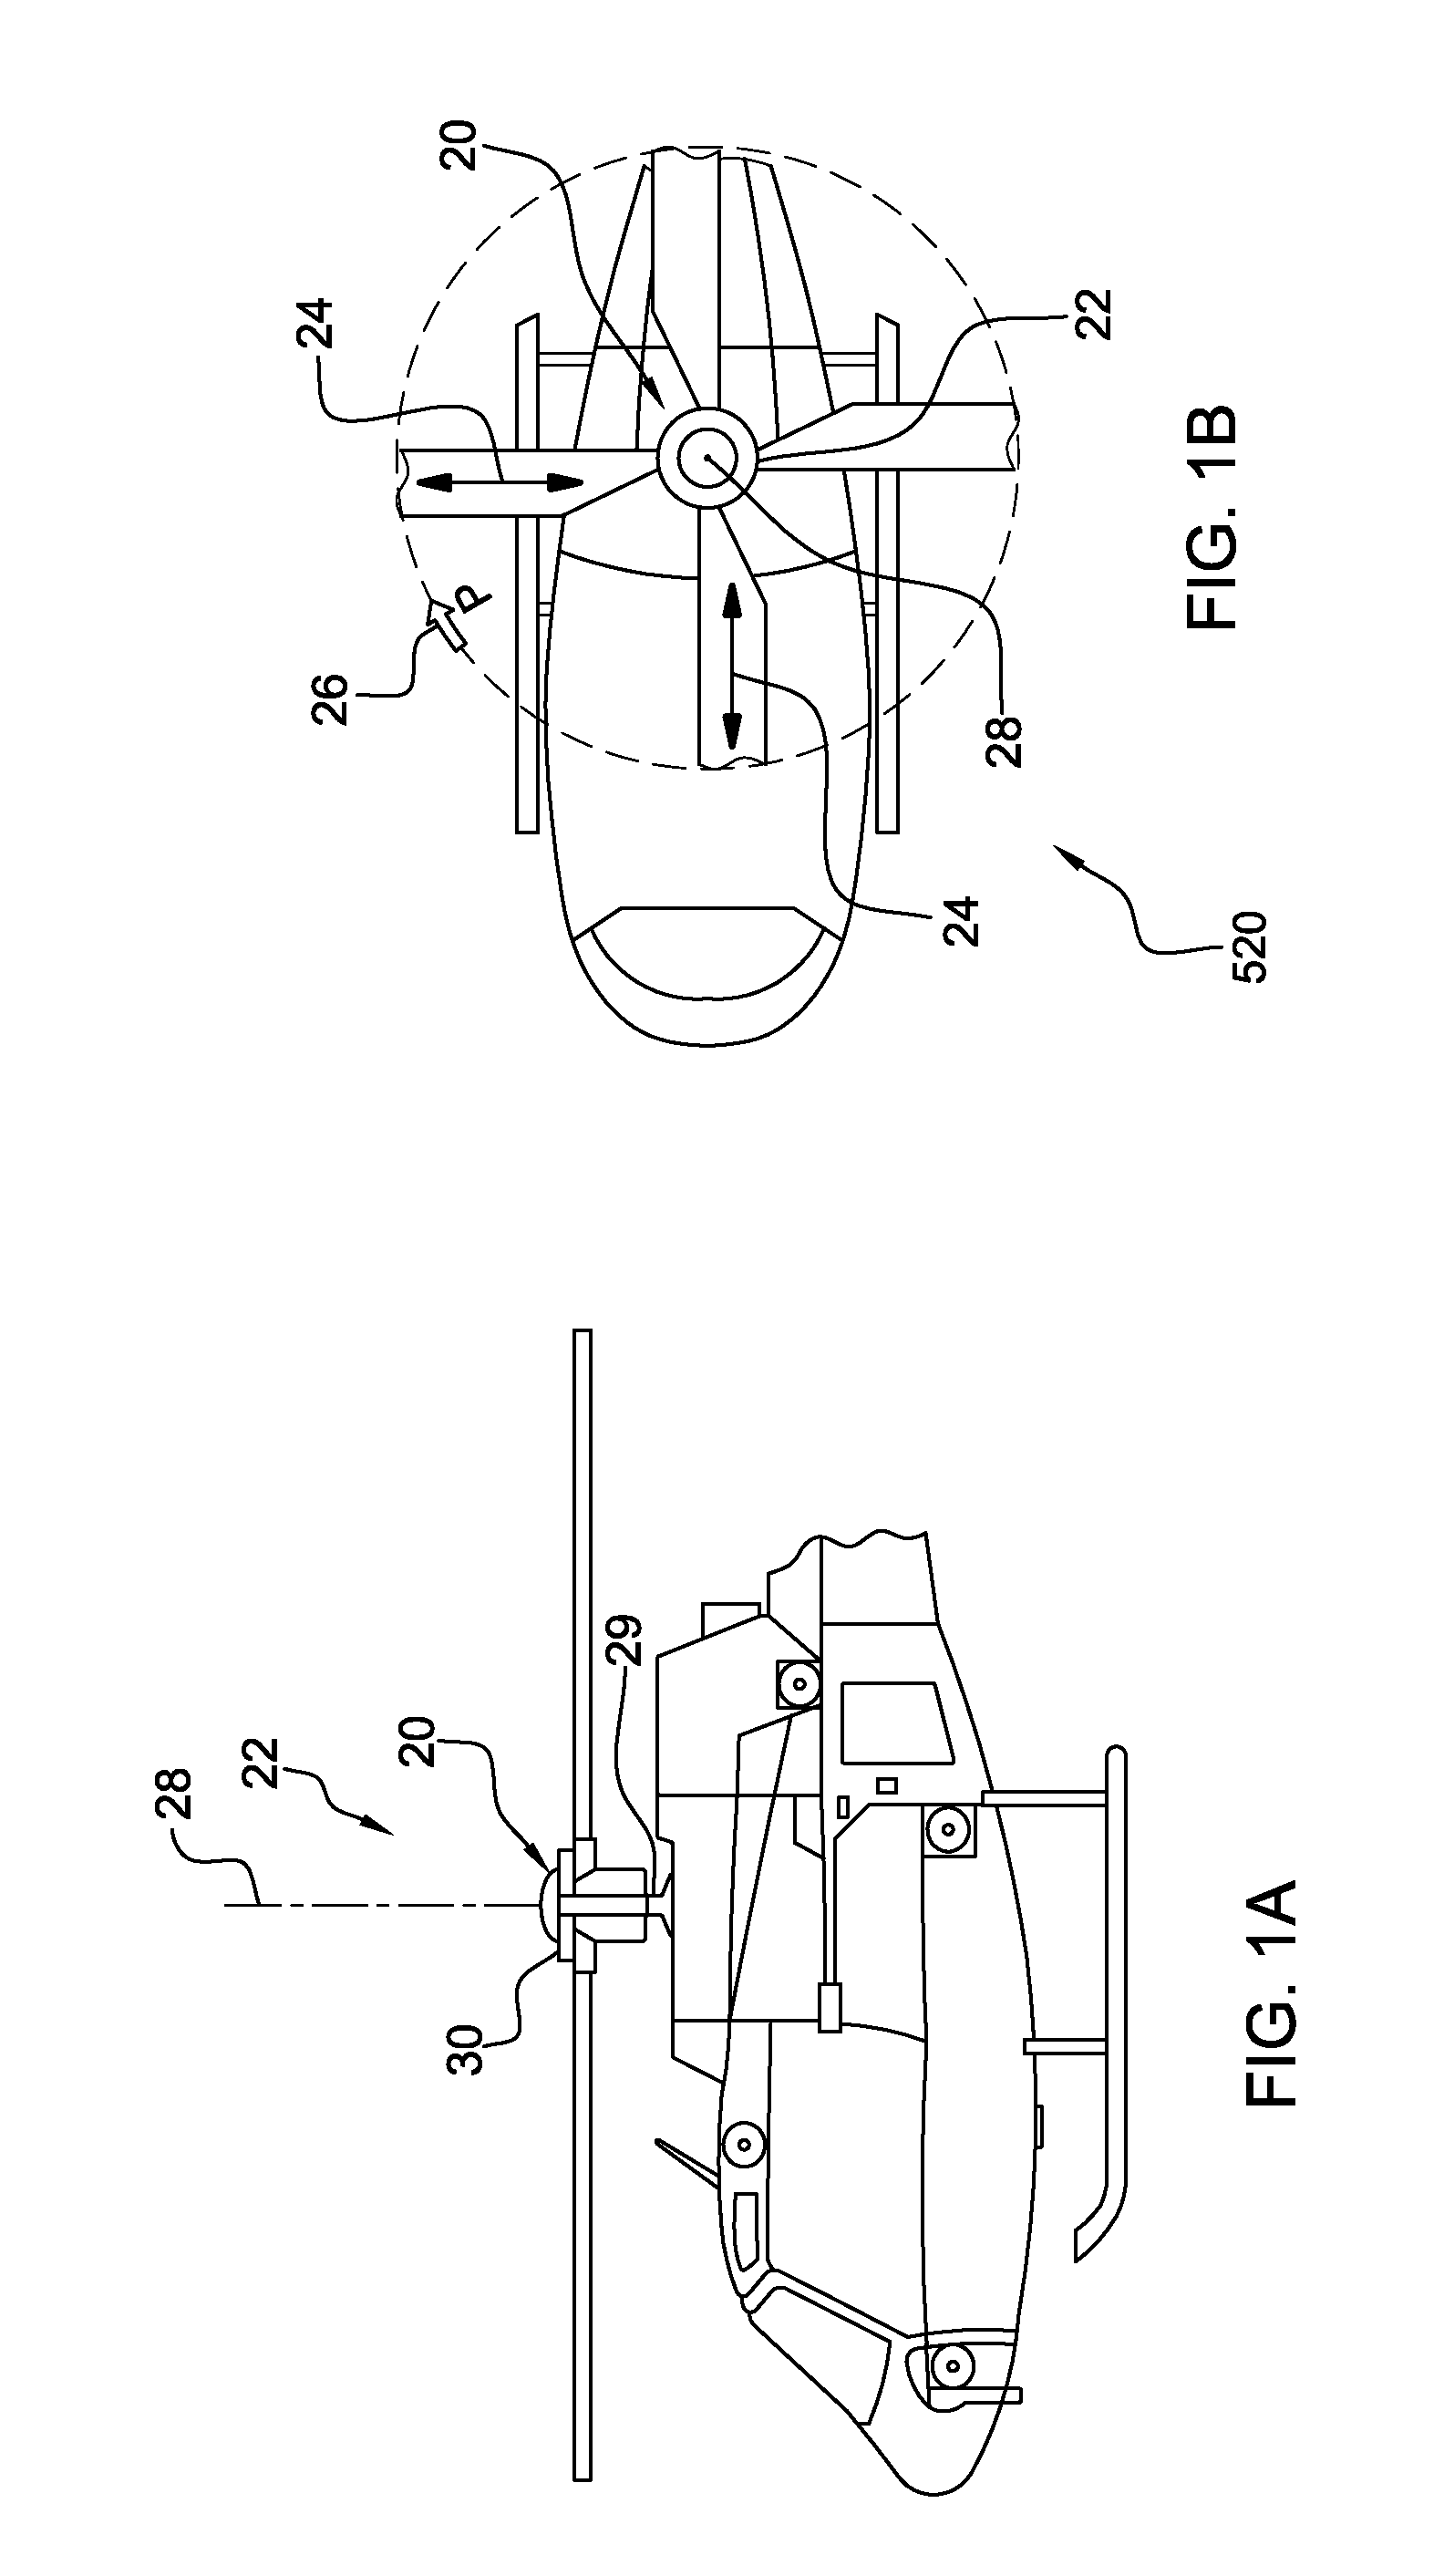 Helicopter vibration control system and rotating assembly rotary forces generators for canceling vibrations